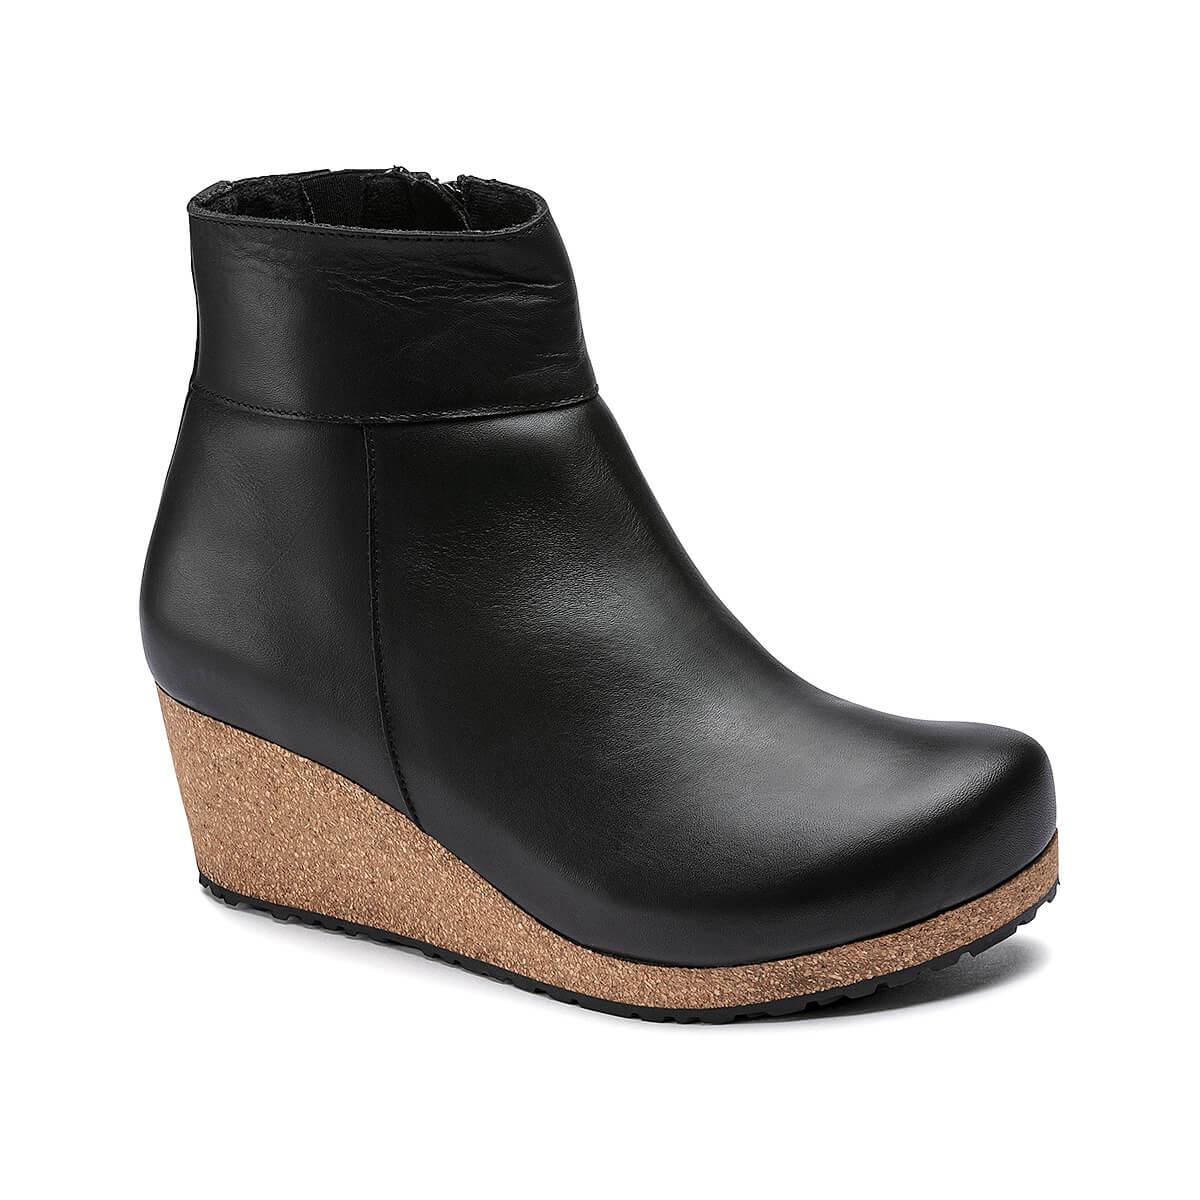  Women's Ebba Wedged Boots